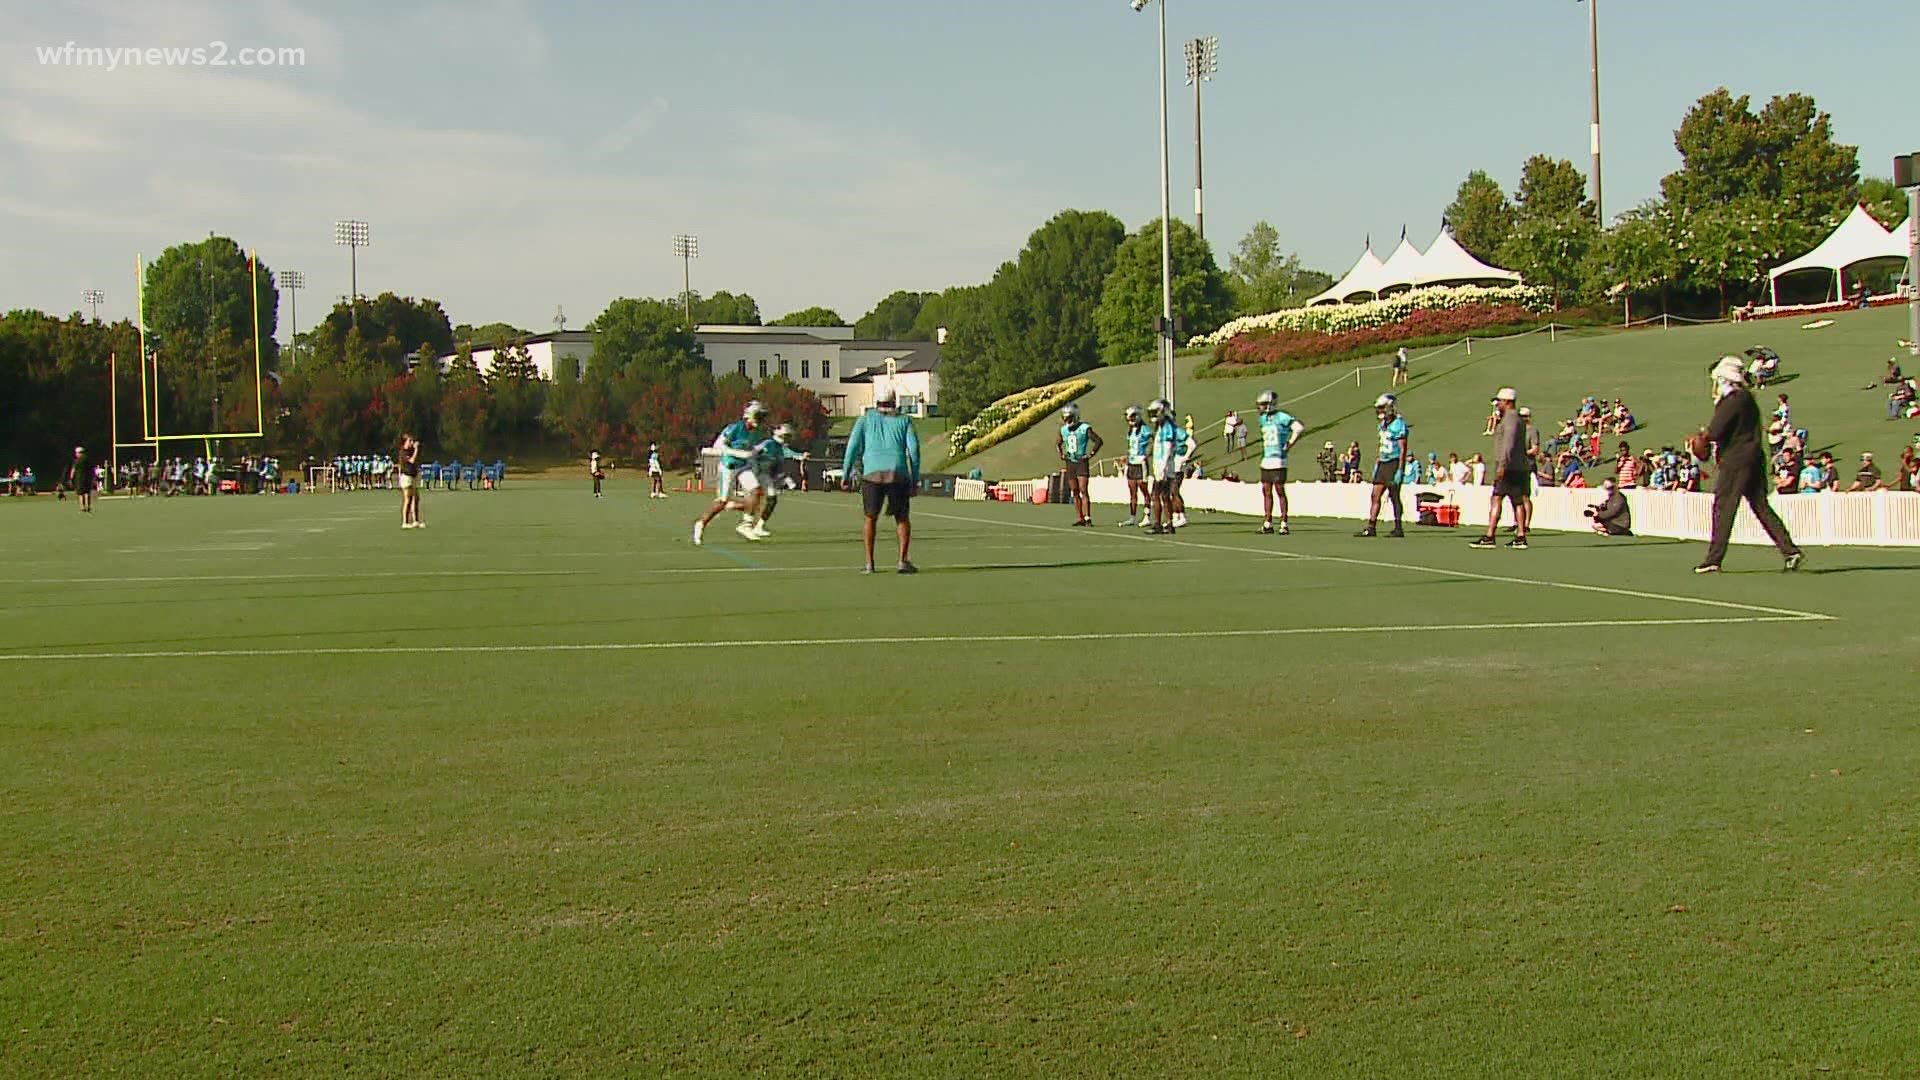 Panthers fan, Donnie Holland, made the trip to South Carolina for the Panthers’ training camp to get a look at this year’s team.